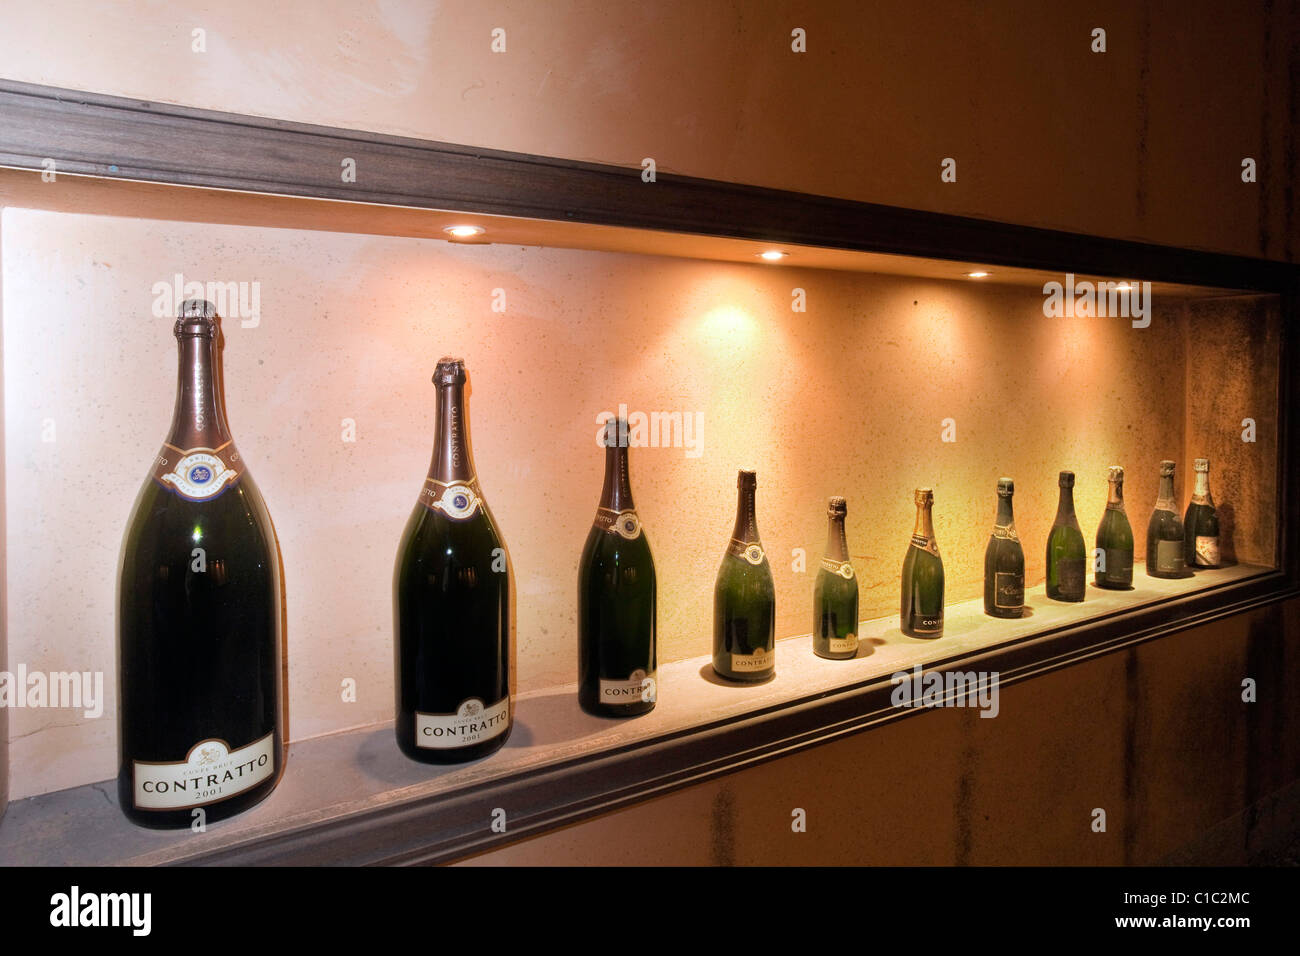 Contratto underground wine cathedral in Canelli,a collection of vintage bottles, Asti, Piedmont, Italy, Europe Stock Photo